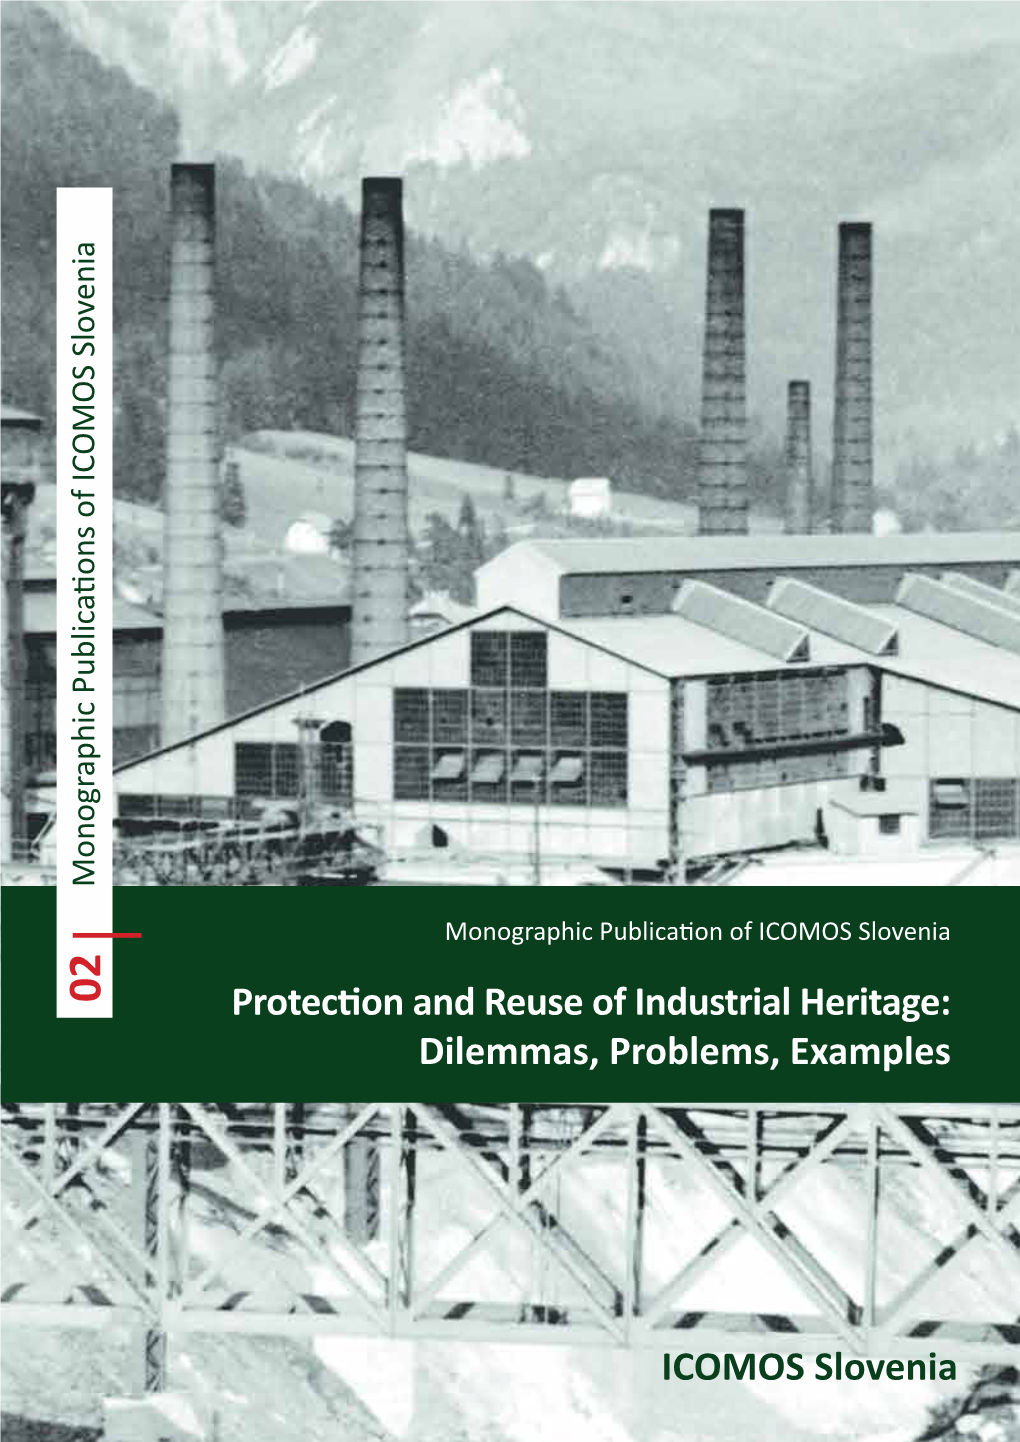 Protection and Reuse of Industrial Heritage: Dilemmas, Problems, Examples ICOMOS Slovenia